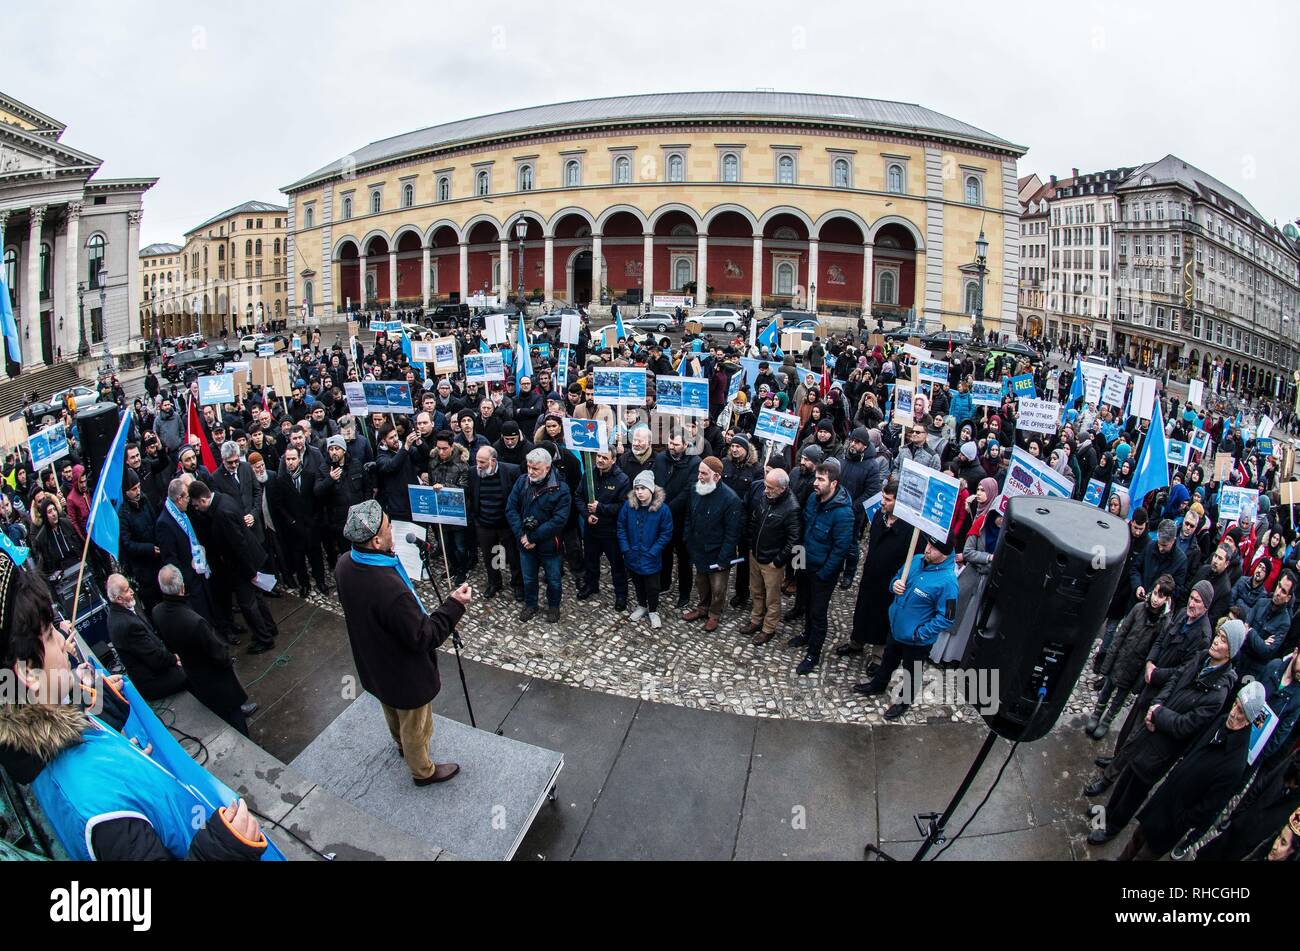 Munich, Bavaria, Germany. 2nd Feb, 2019. to protest against the so-called "Muslim Crackdown"" by the Chinese Communist Party in the Xinjiang Autonomous Region of China. The region is contains roughly 26 million people, 11 million of whom are the ethnically Turkic Uyghurs who still call the region East Turkistan . The CCP has placed upwards of 1 million Uyghurs in reeducation camps, as well as performing widespread surveillance of the non-Han residents. There are many reports of psychological and physic Credit: ZUM Credit: ZUMA Press, Inc./Alamy Live News Stock Photo